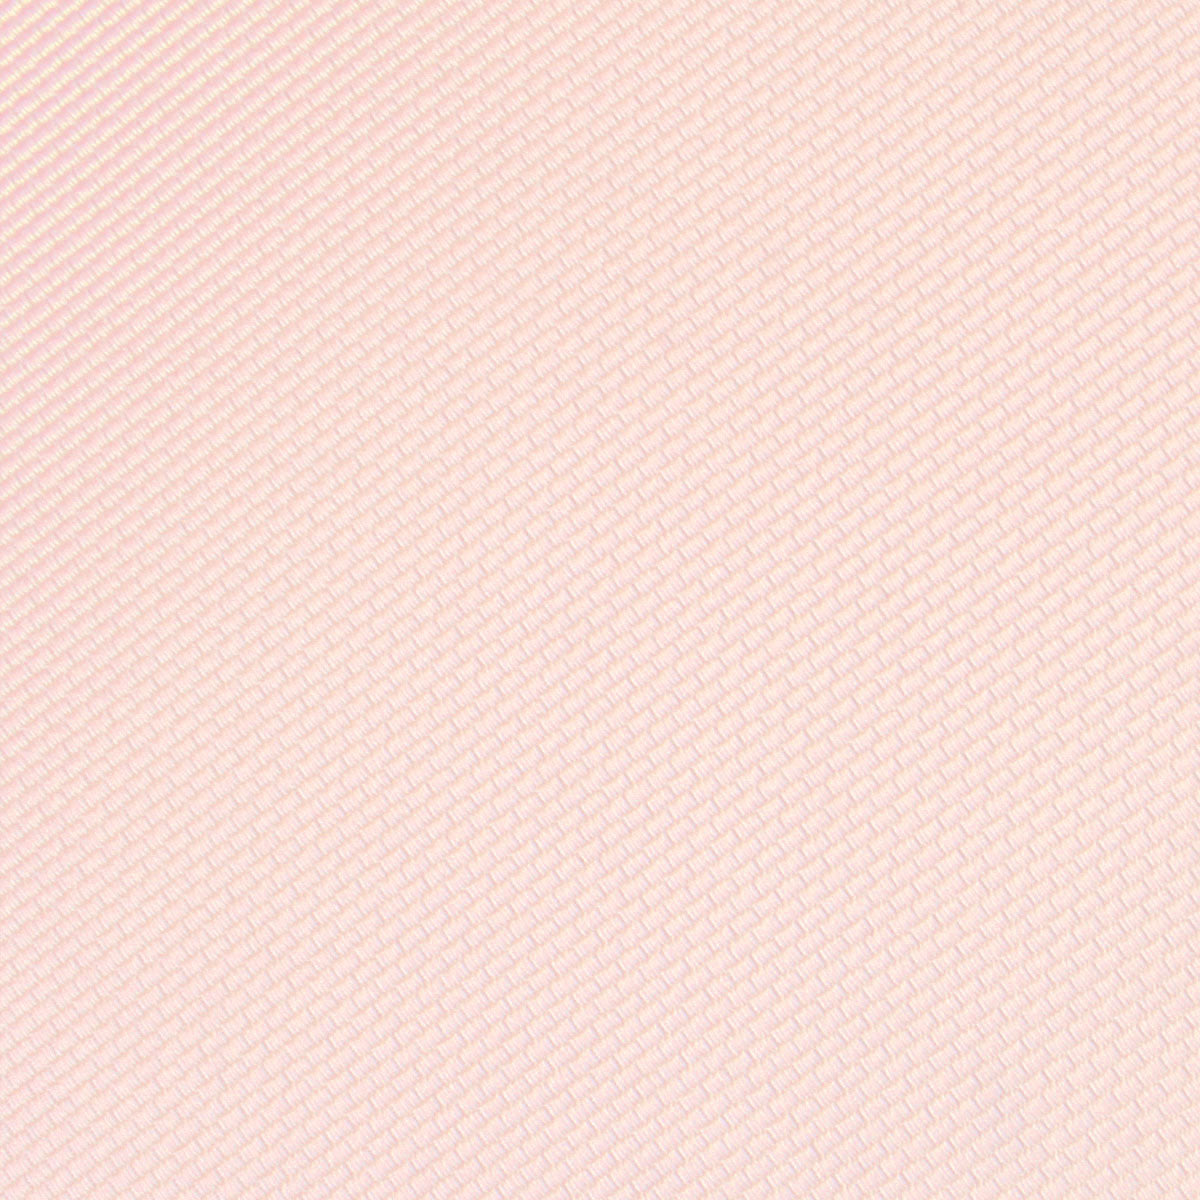 Misty Rose Pink Weave Self Bow Tie Fabric